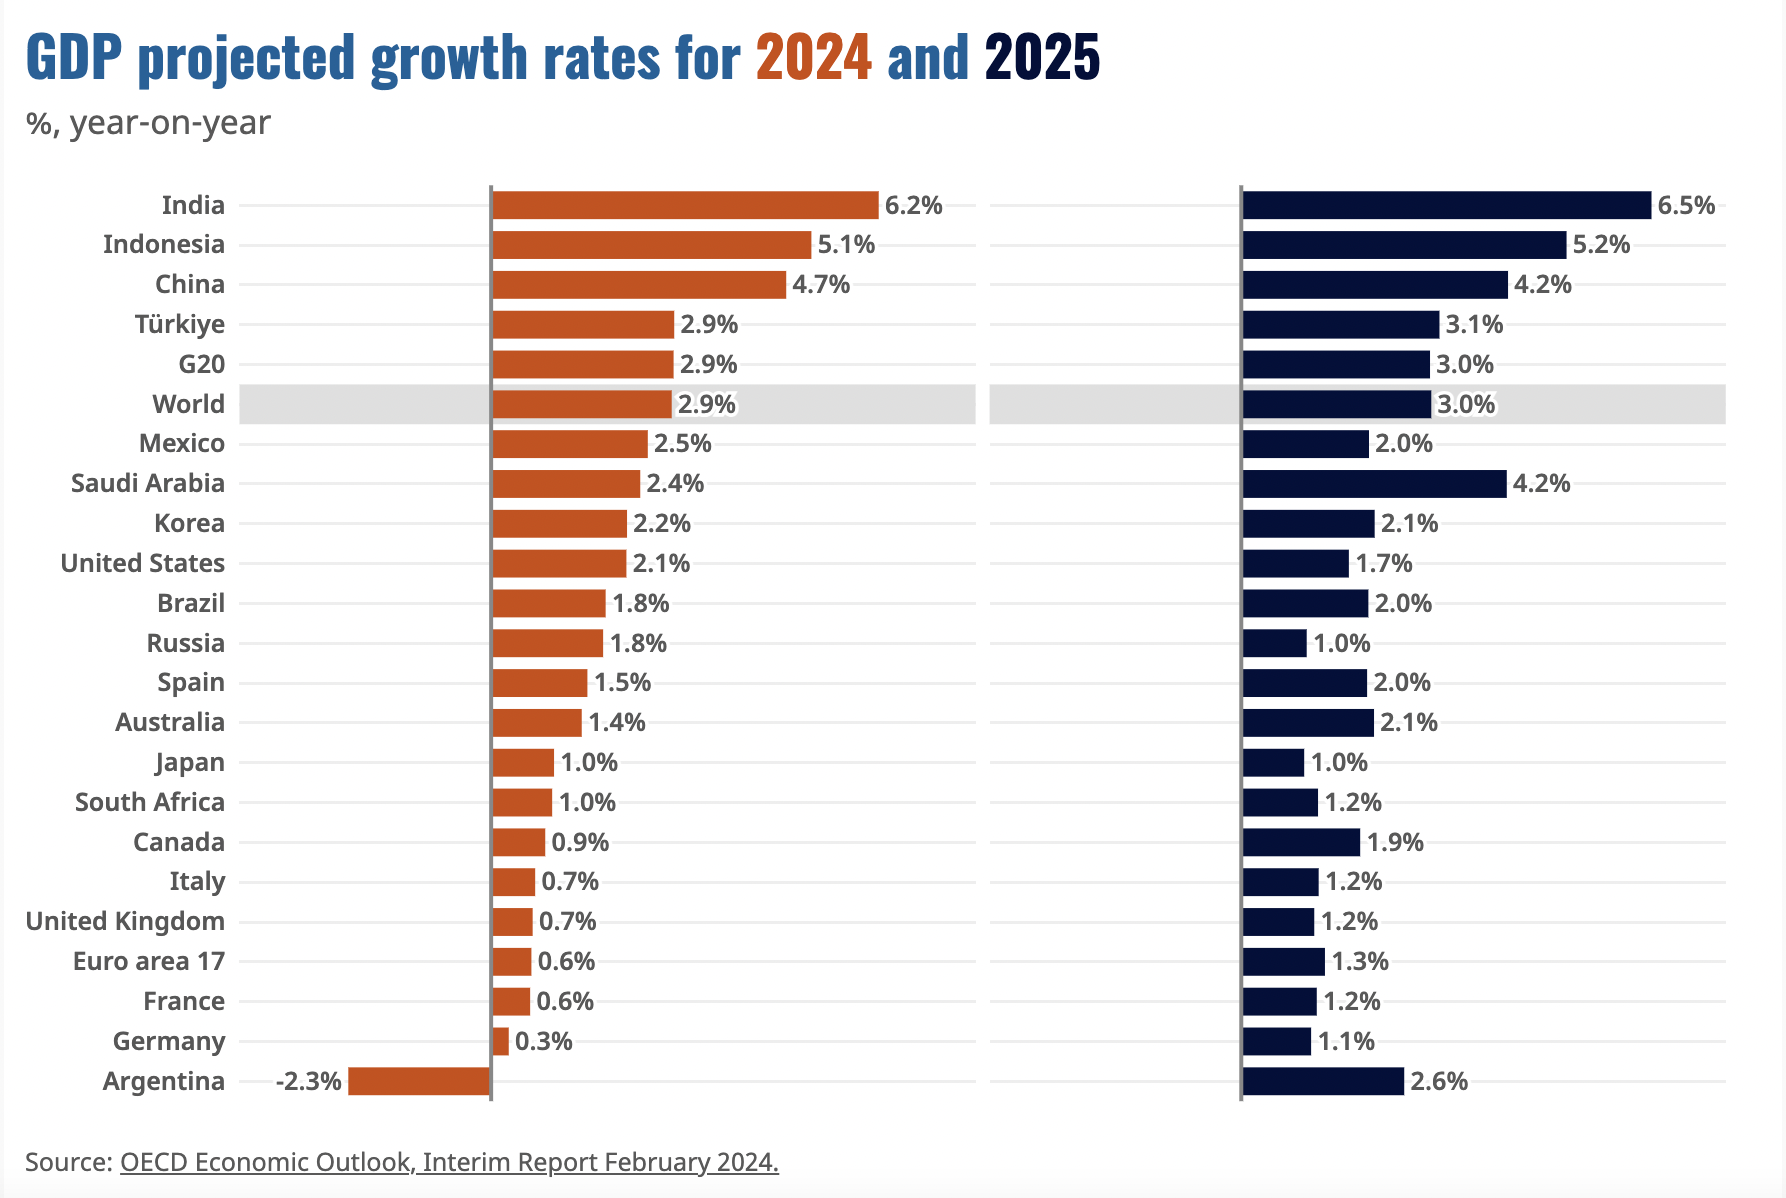 A chart for projected GDP growth rates for 2024 and 2025 from the February economic outlook report by the Organisation for Economic Co-operation and Development (OECD). /OECD